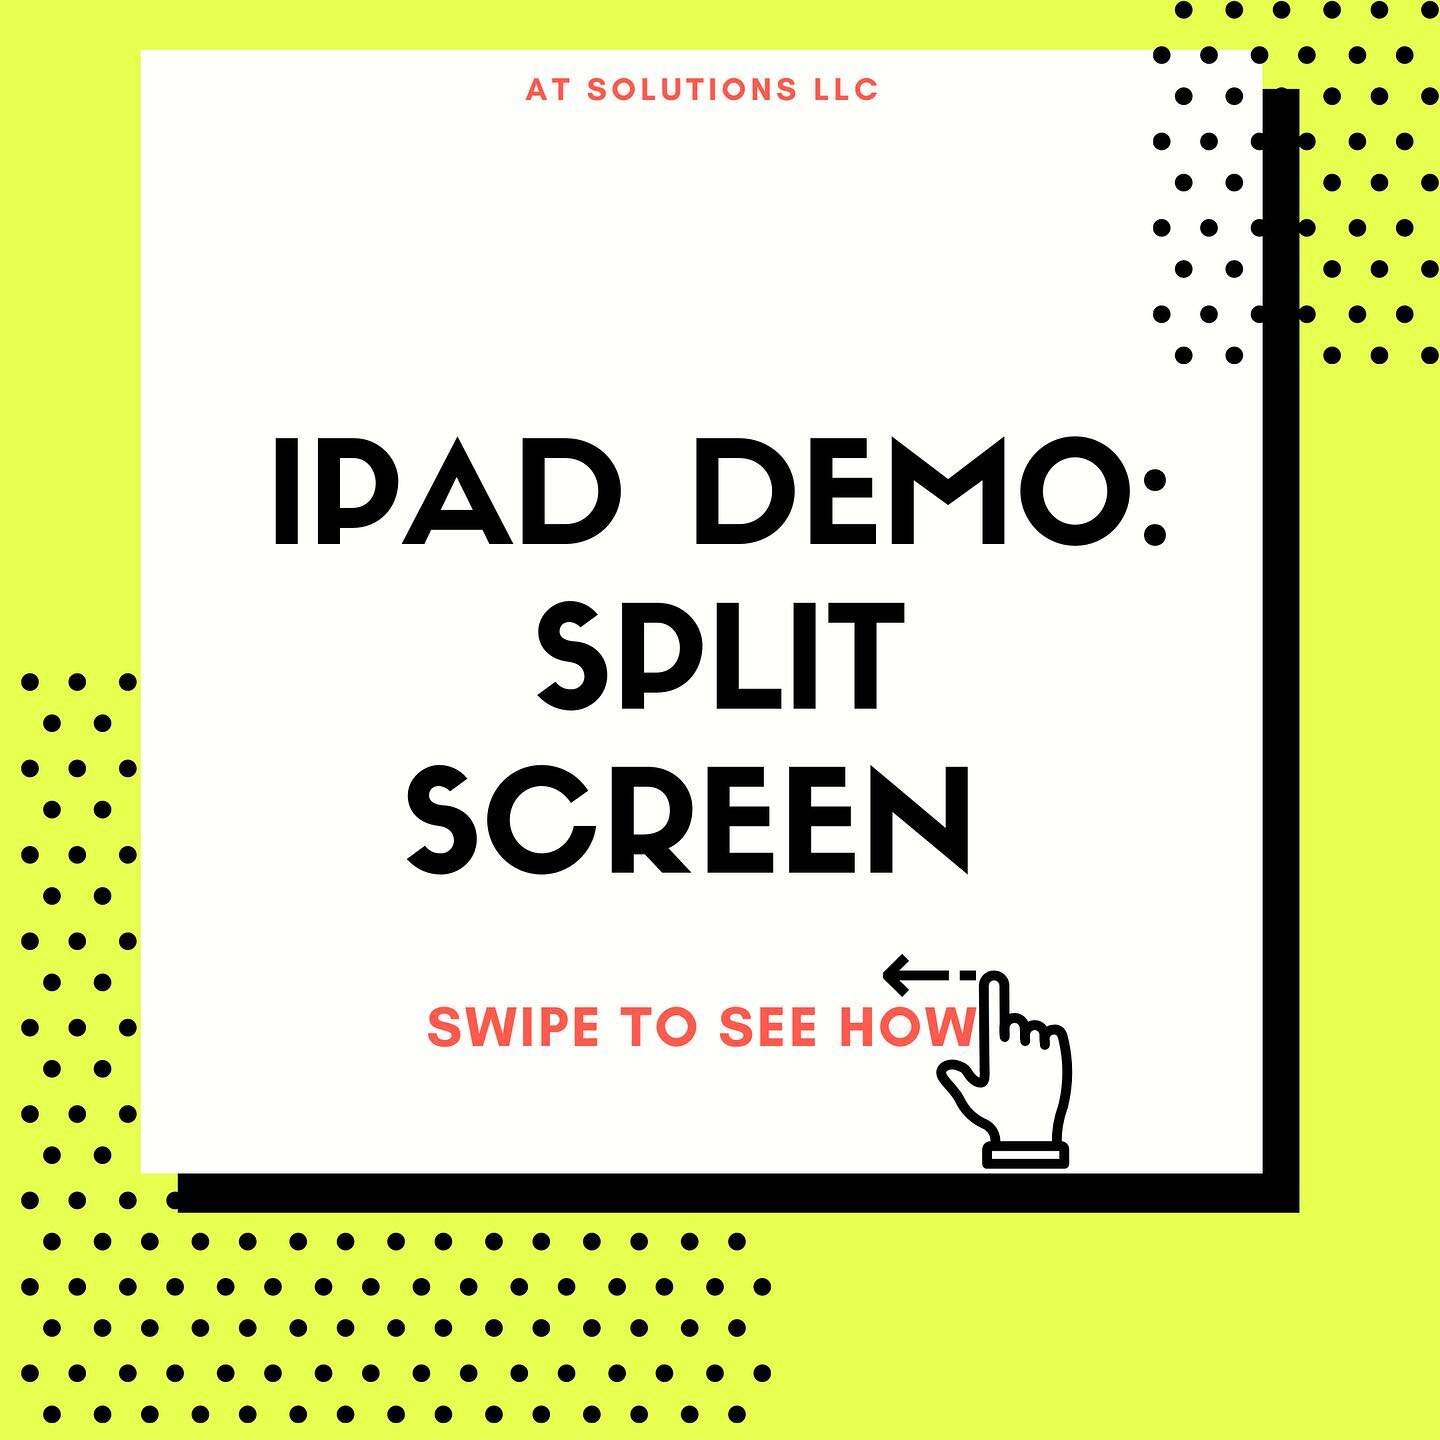 ⬅️➡️Split screen on the iPad! A great way to multitask without switching back and forth between apps. Drag and drop content from one app to another.